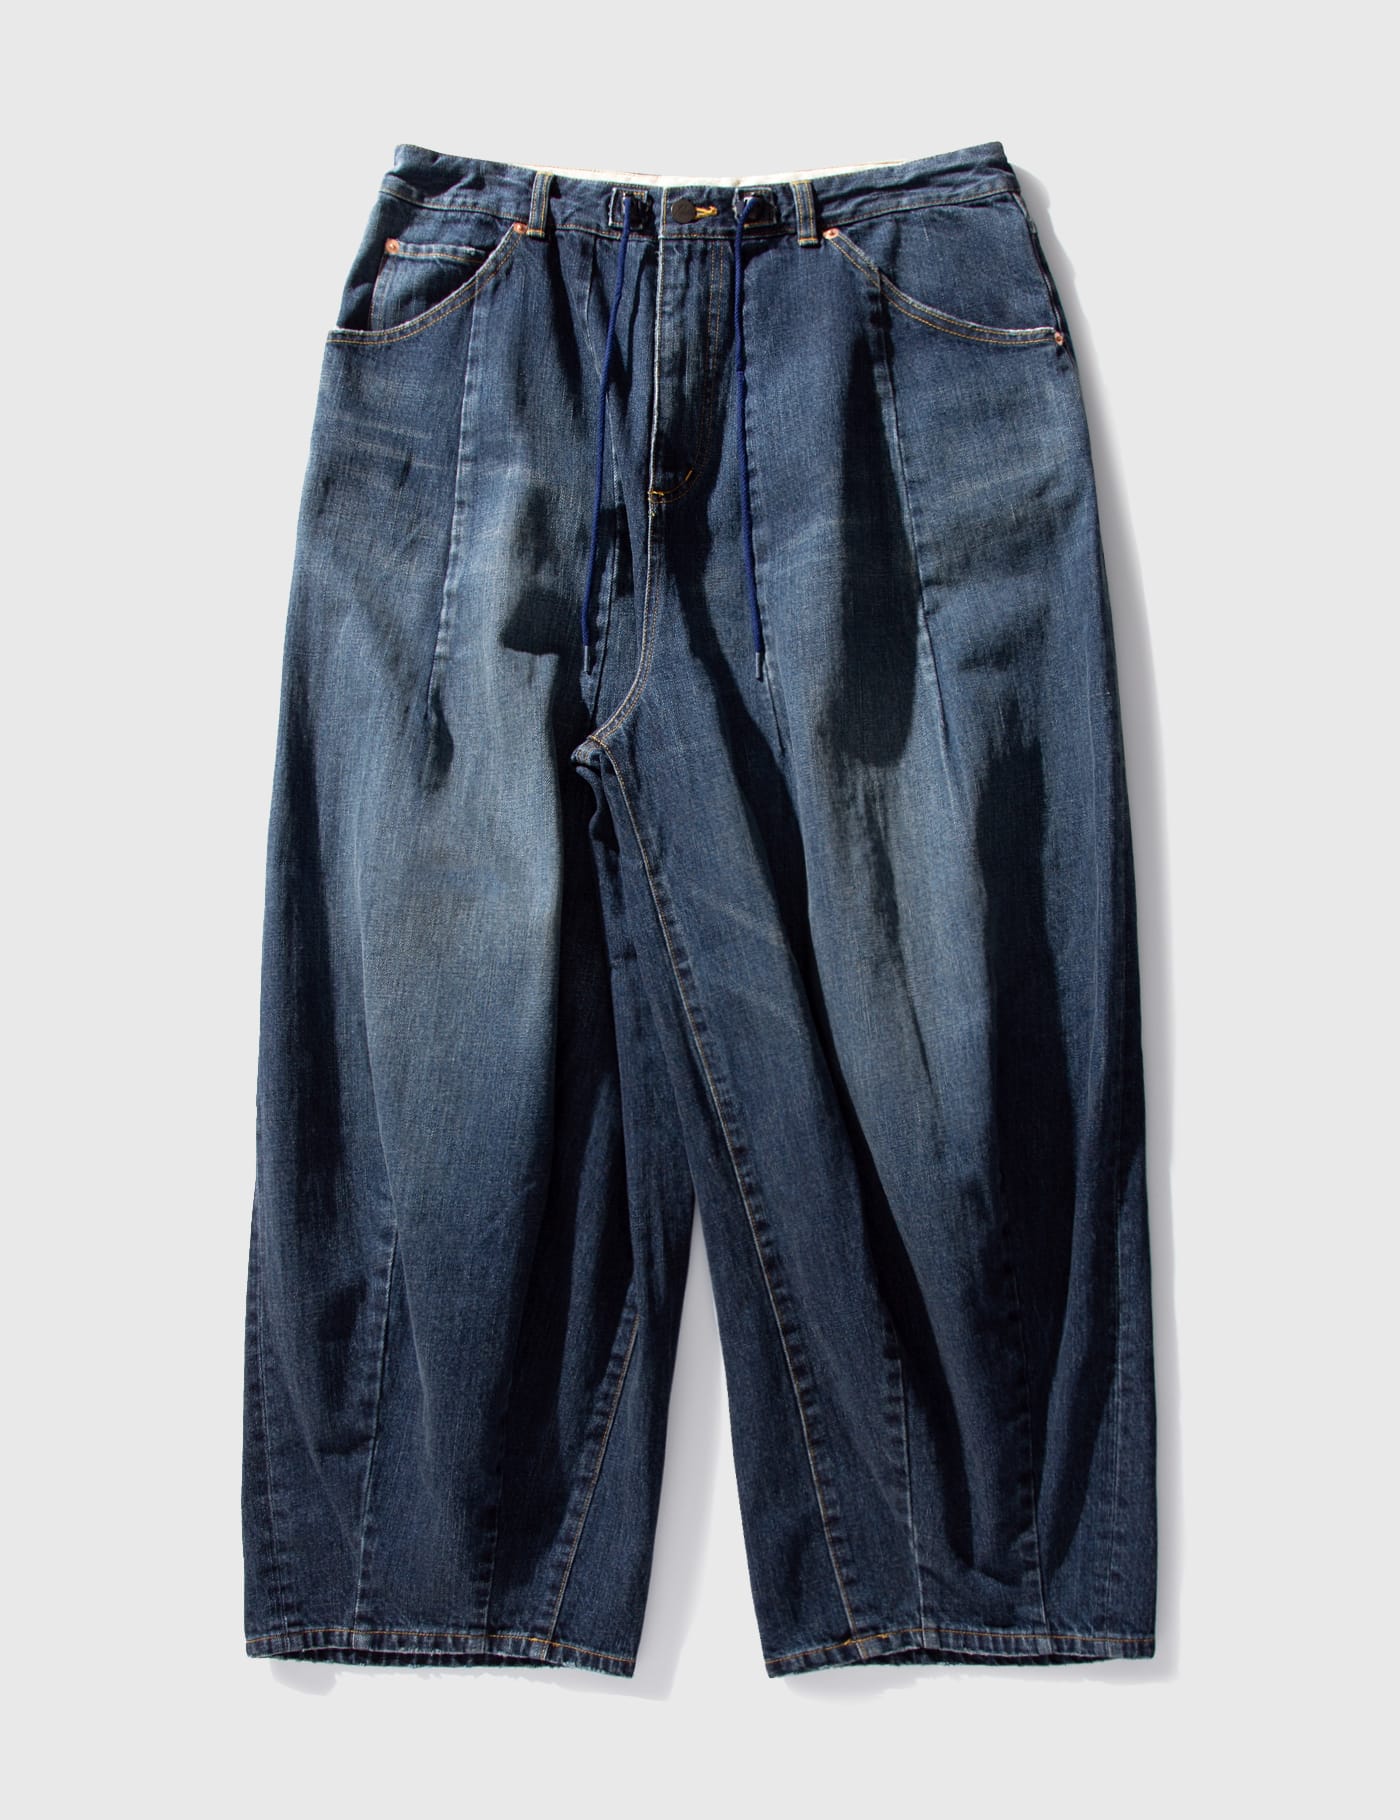 Needles - 12oz Denim Pants | HBX - Globally Curated Fashion and 